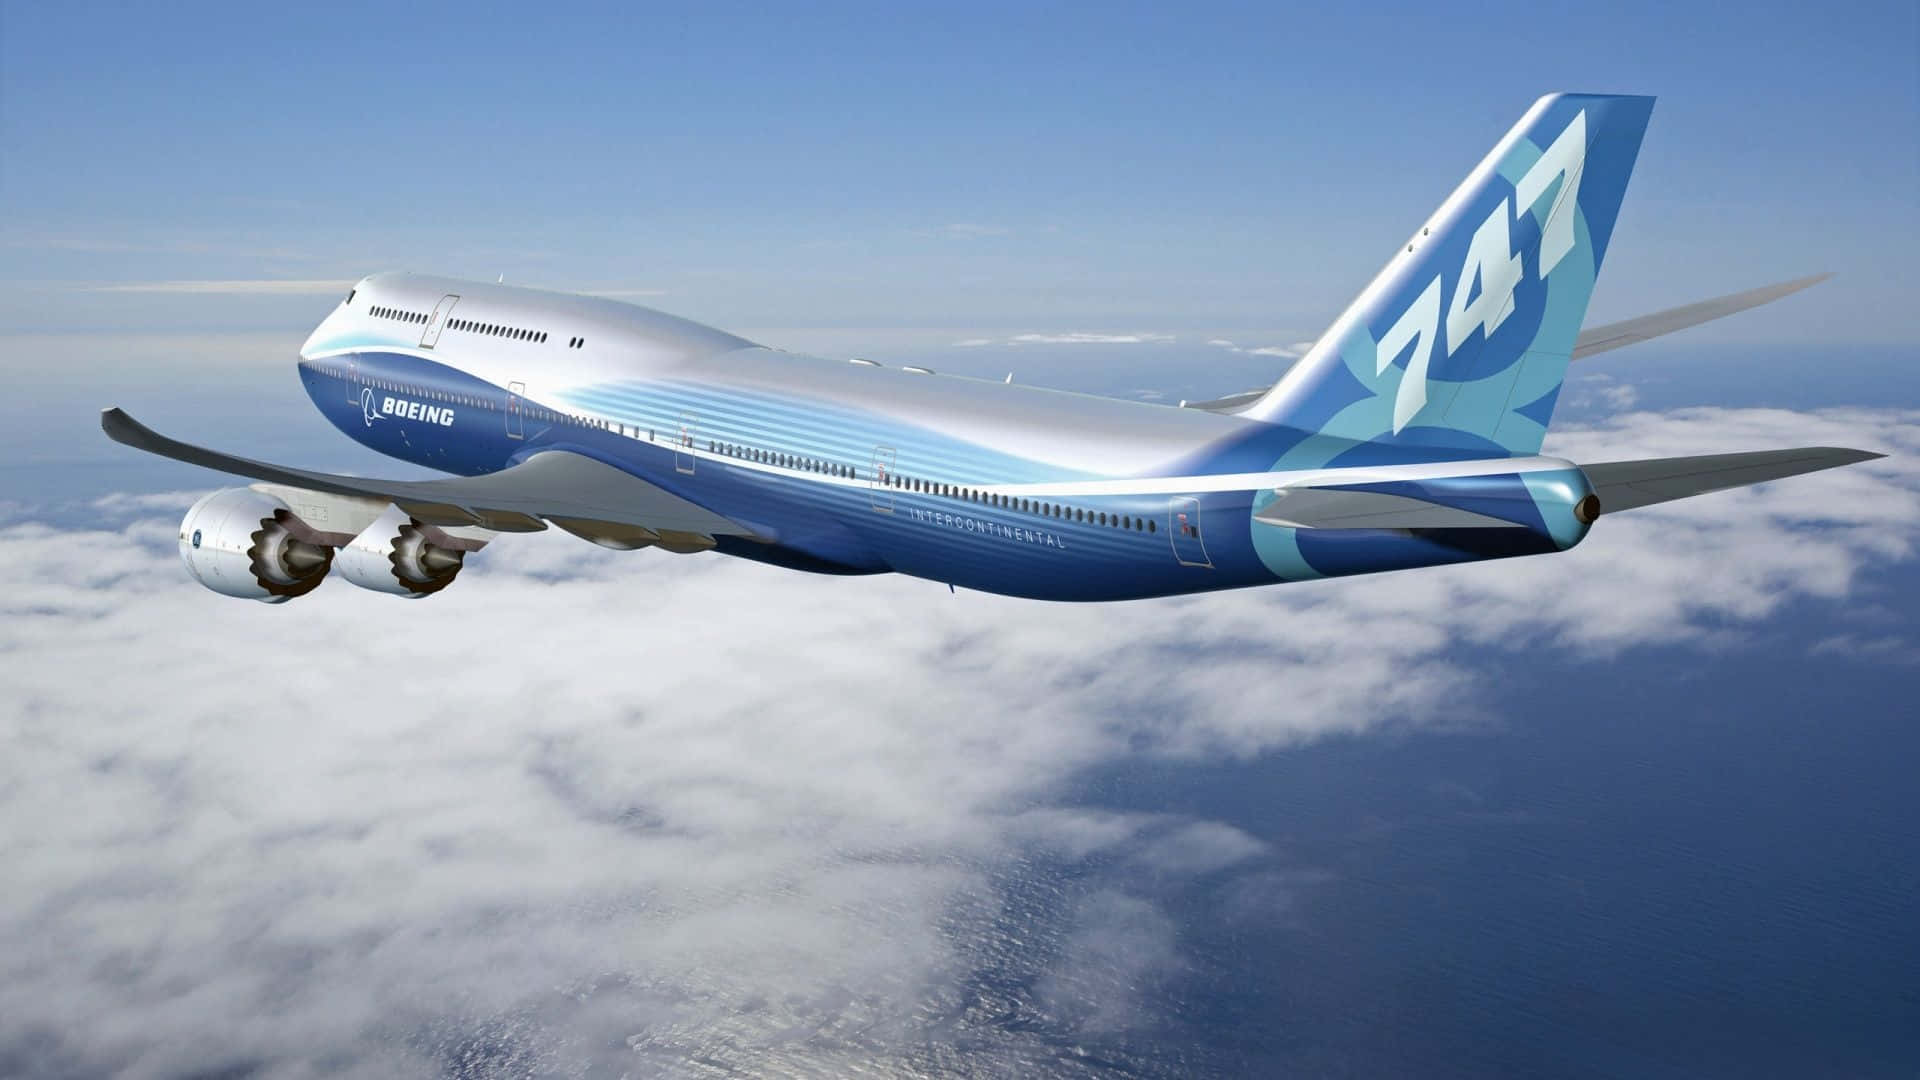 747 Airplane On Air Background